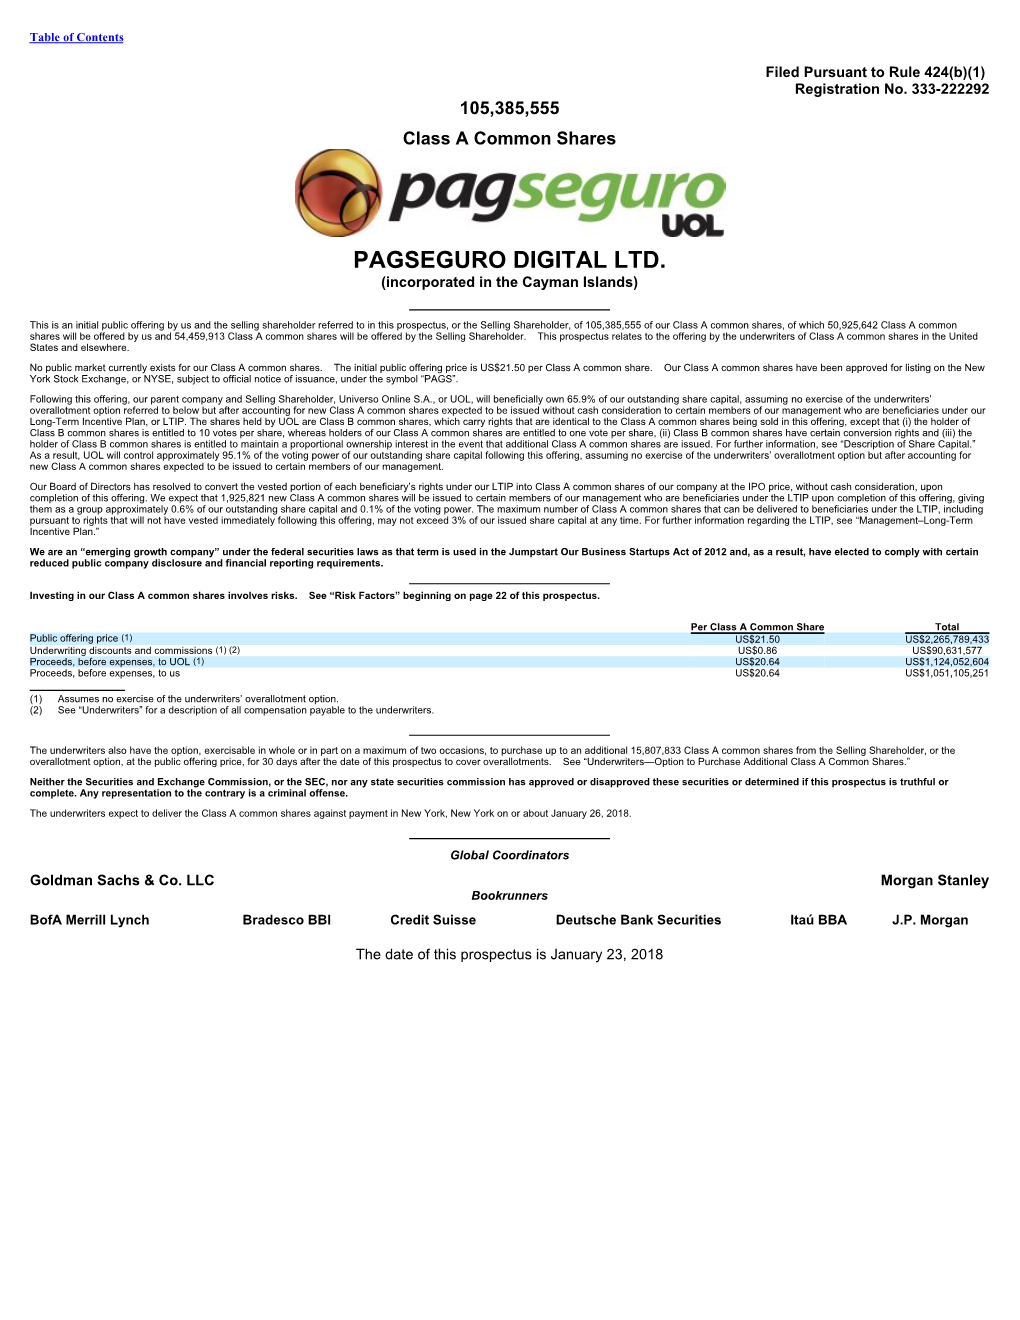 PAGSEGURO DIGITAL LTD. (Incorporated in the Cayman Islands)